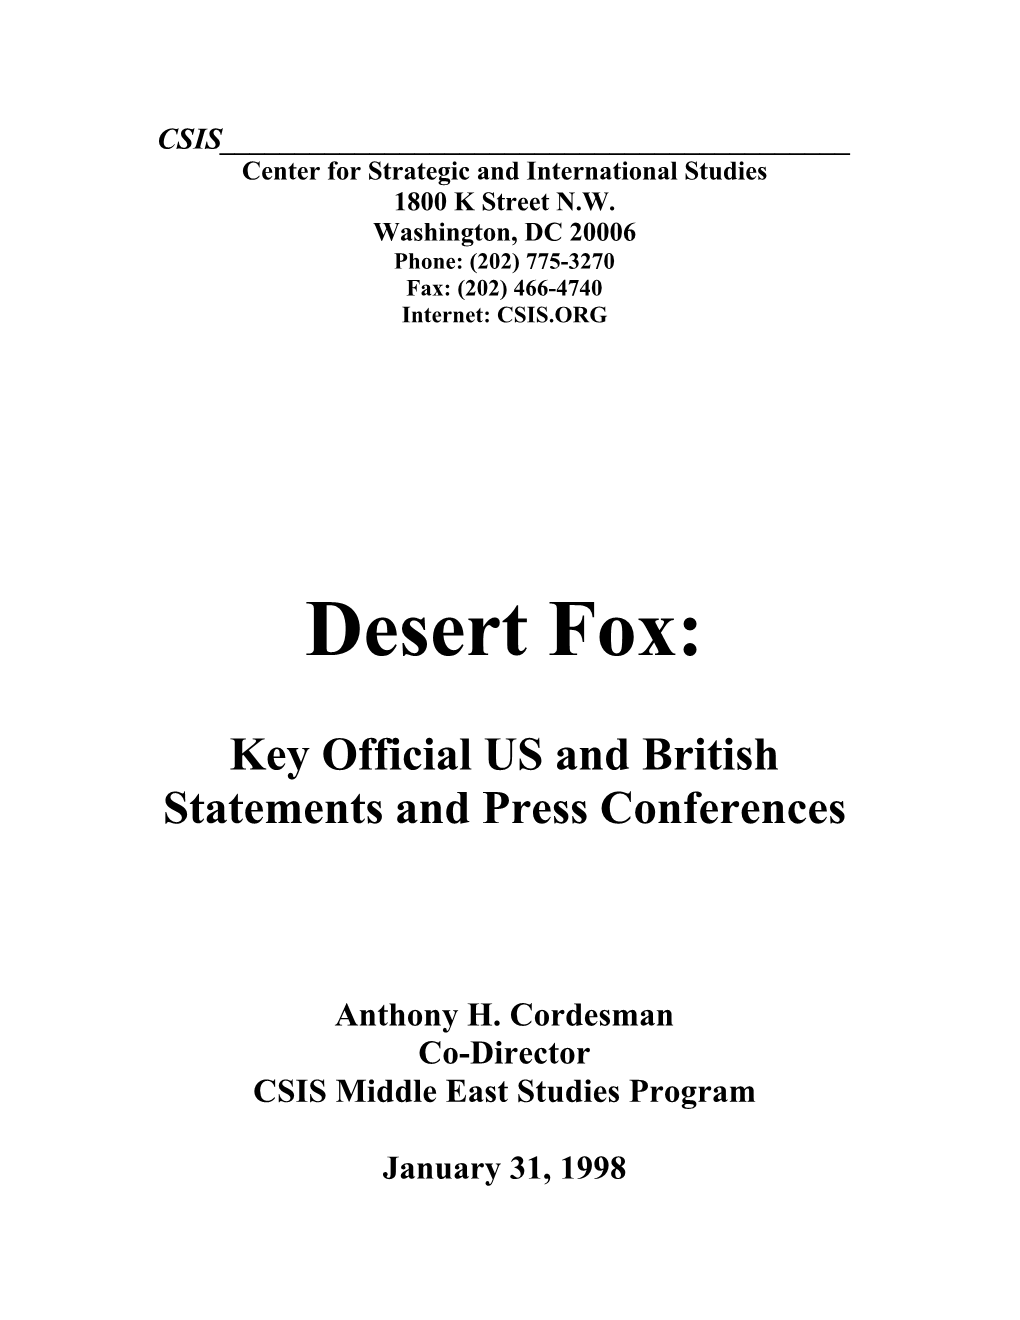 Desert Fox: Key Official US and British Statements And